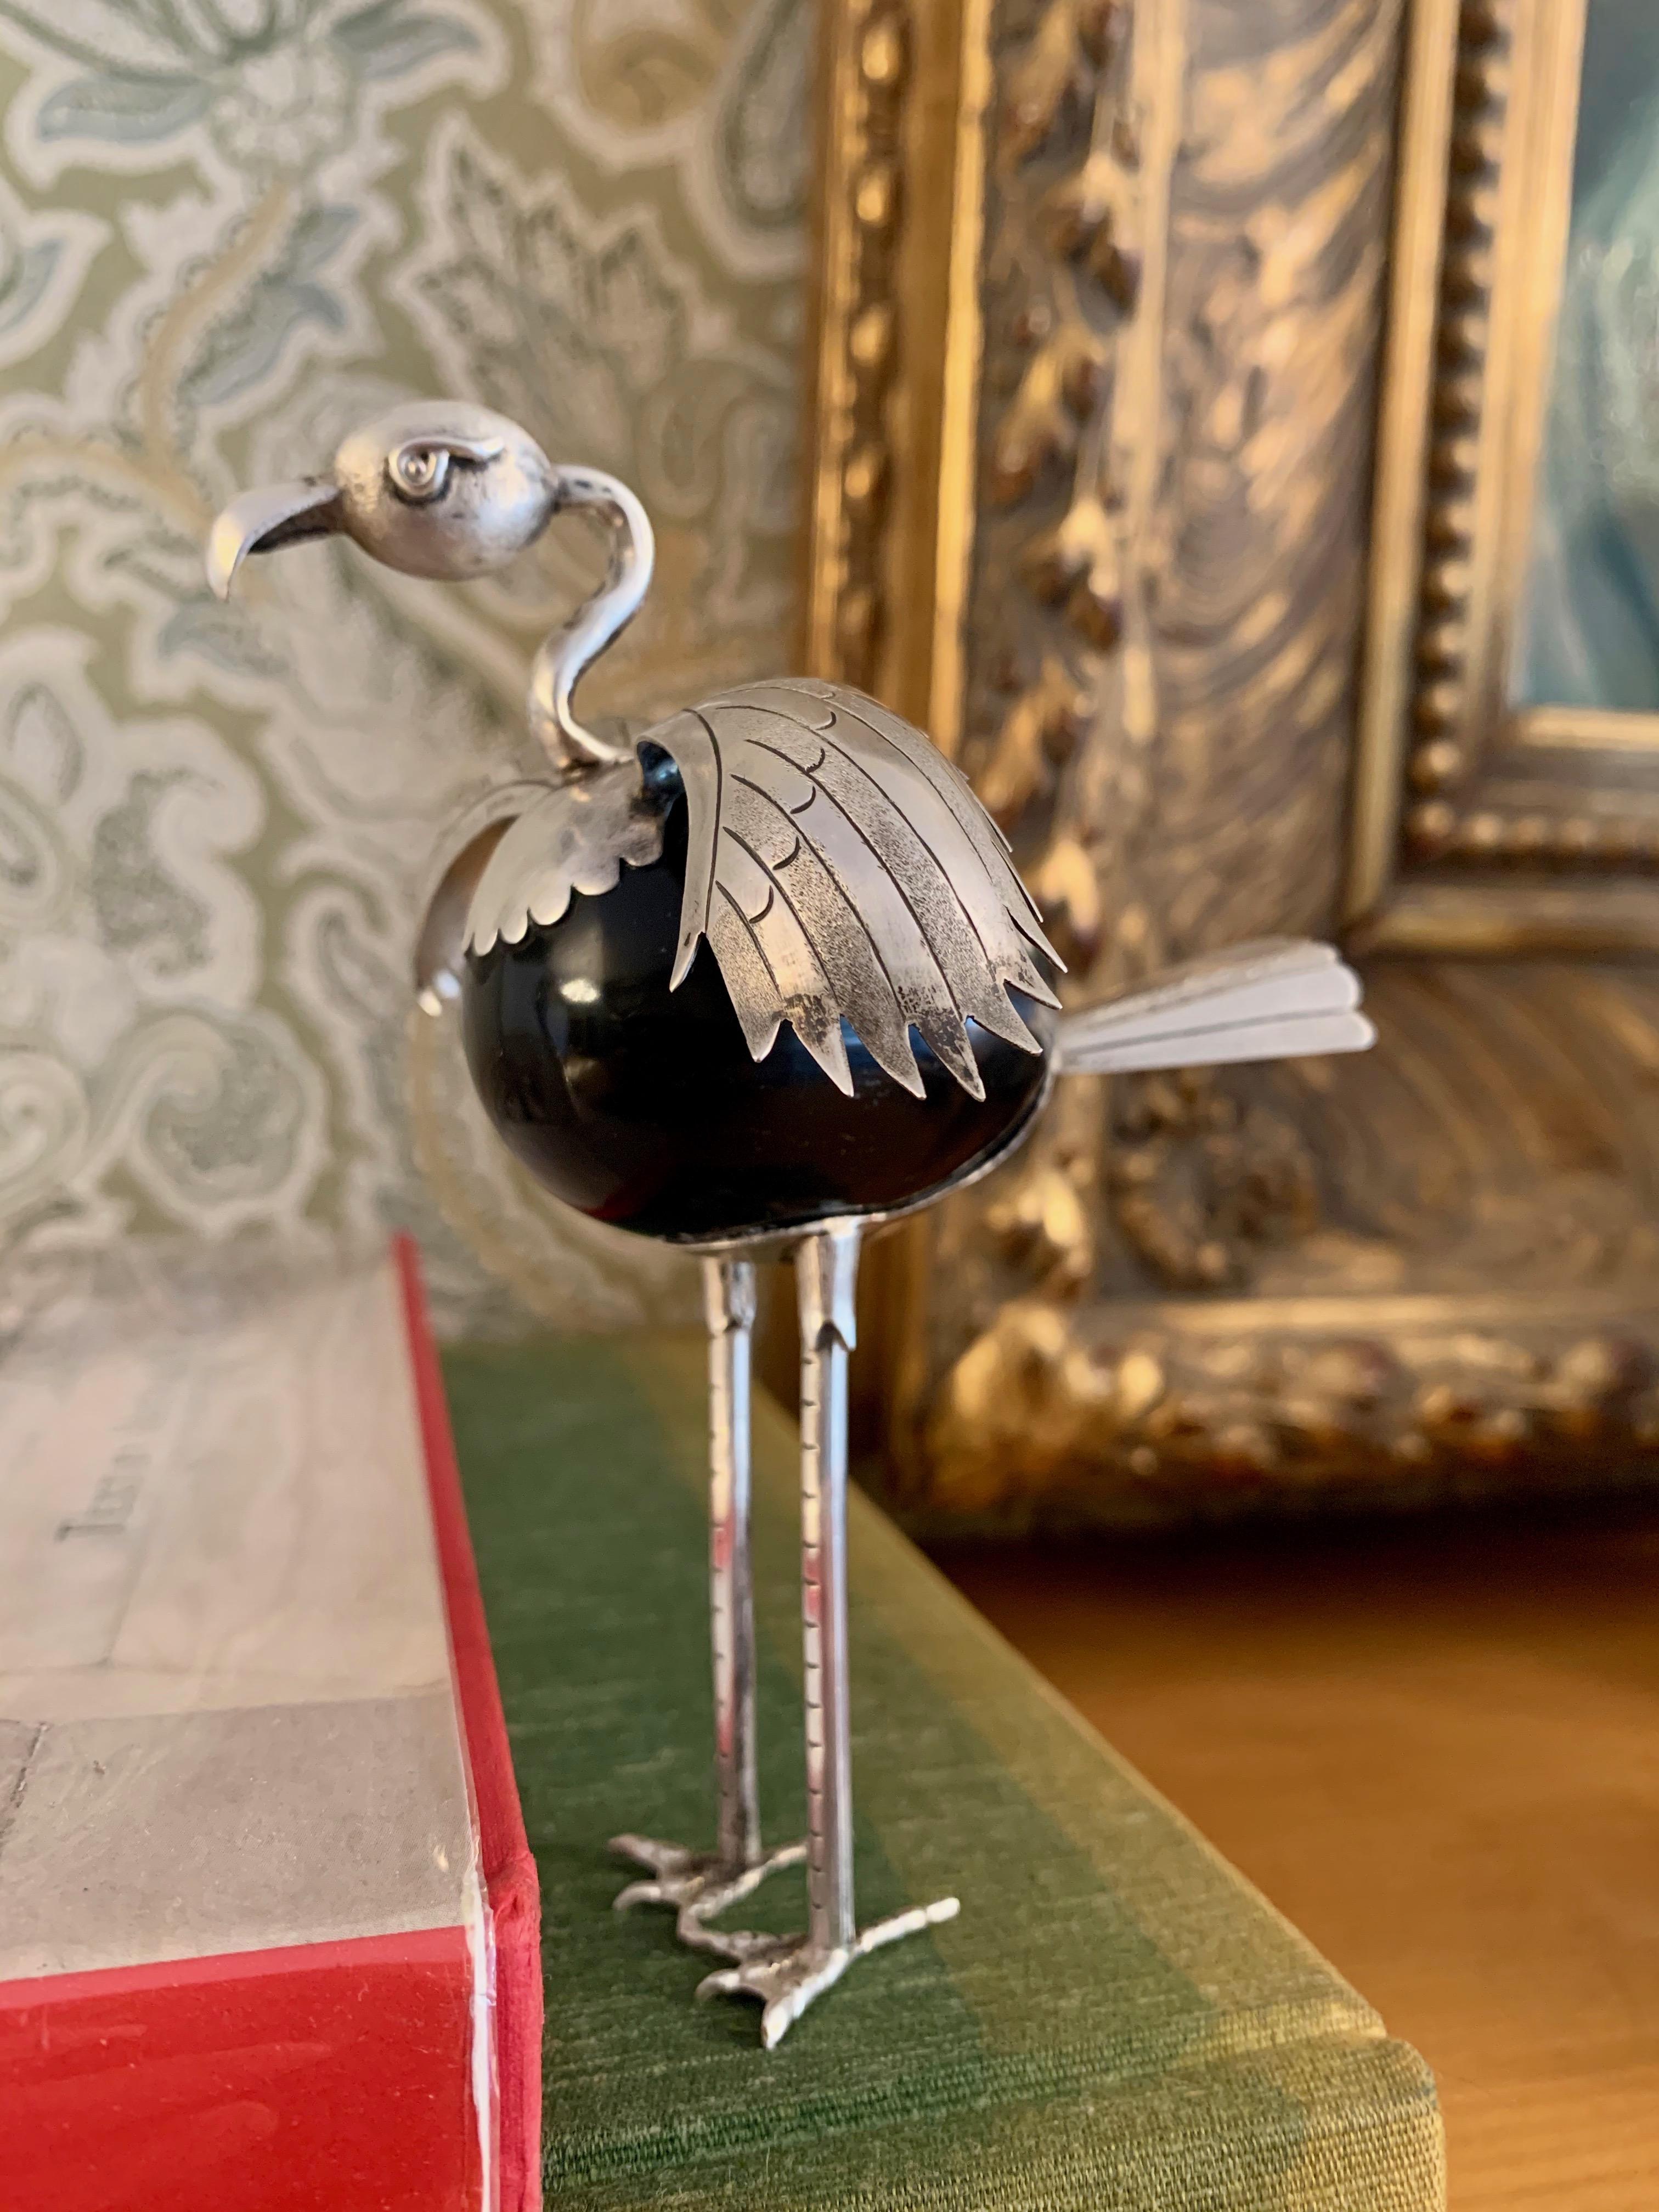 Mexican sterling silver and onyx bird sculpture, an onyx egg shaped body, with sterling 925 legs, wings, and head. A wonderful decorative piece with nice detailing to the wings, head and legs.